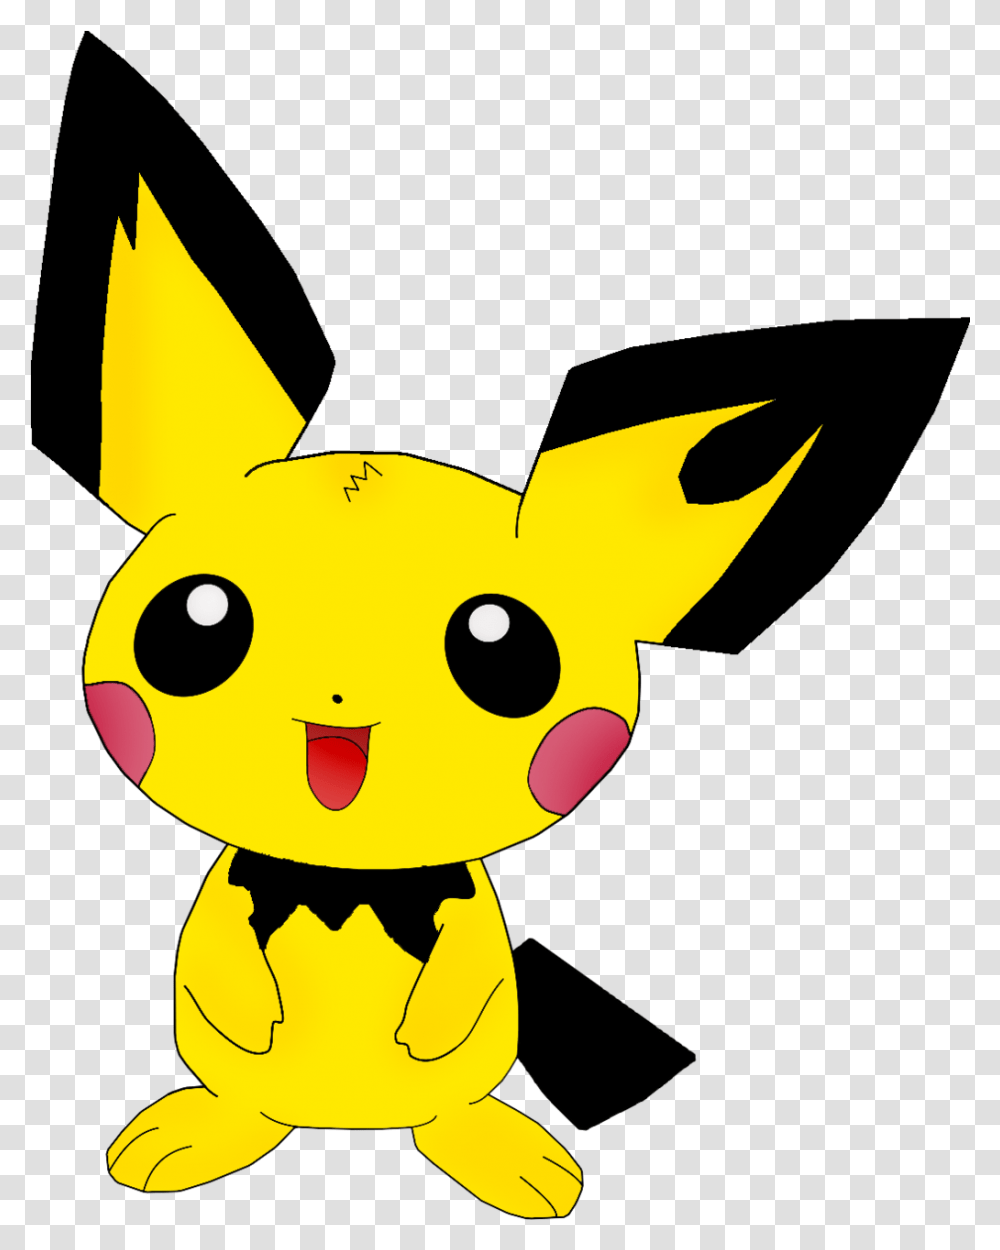 Pichu 9 Image Pichu, Outdoors, Toy, Animal, Star Symbol Transparent Png